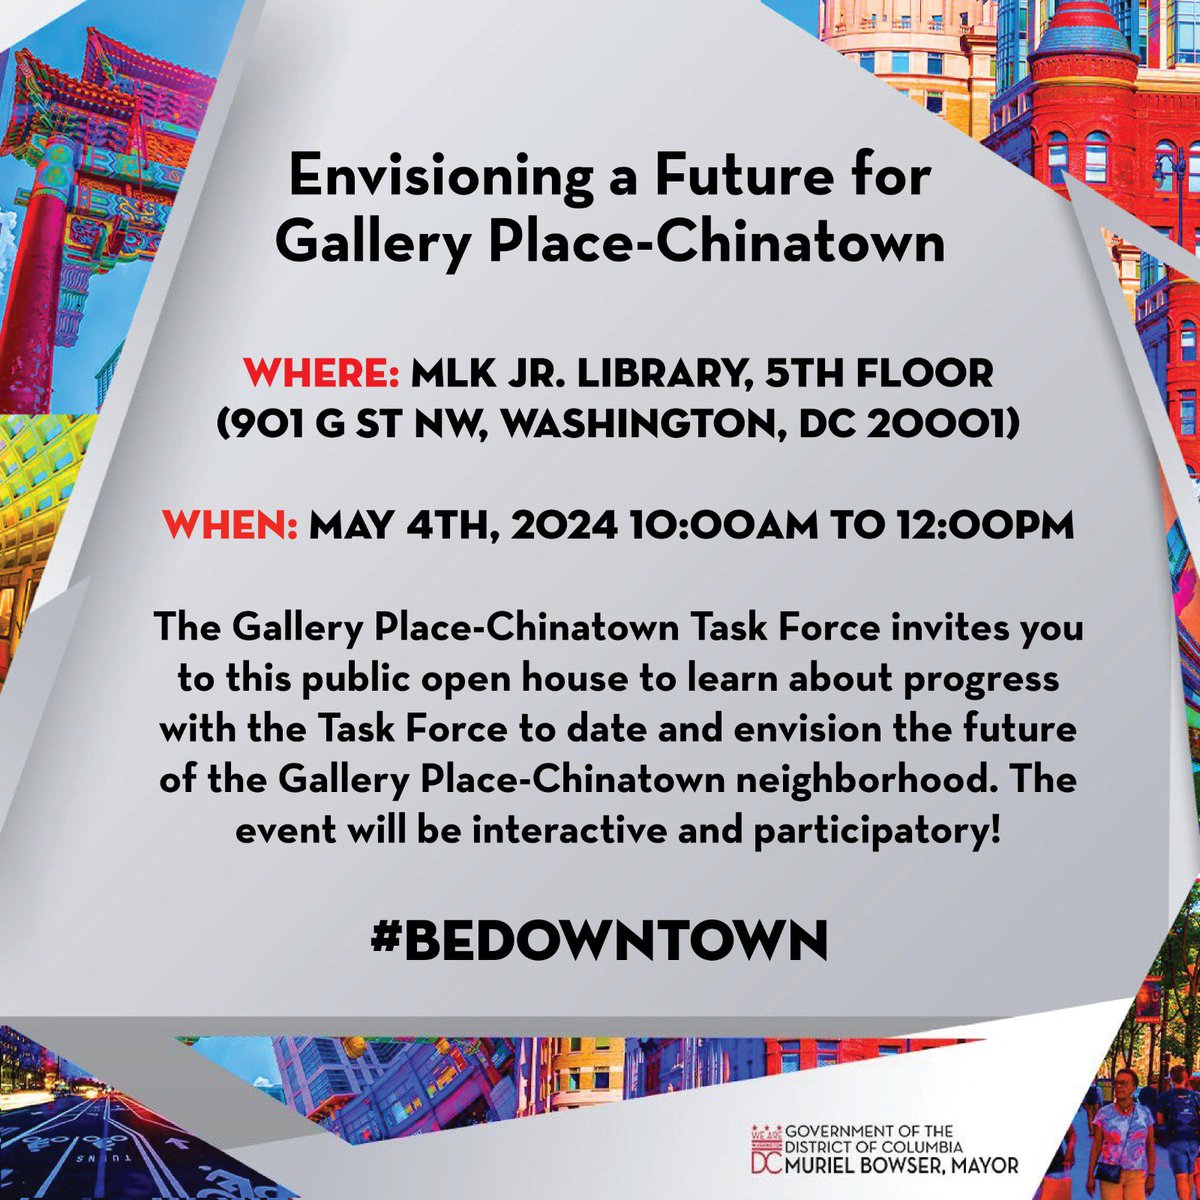 A few months ago, we launched the Gallery Place-Chinatown Task Force, and this weekend, we're going to hear from them and learn about their progress. #BeDowntown this weekend to engage in the process and provide your input: 🗓️Saturday, May 4 ⏰10AM 📍MLK Library, 5th Floor